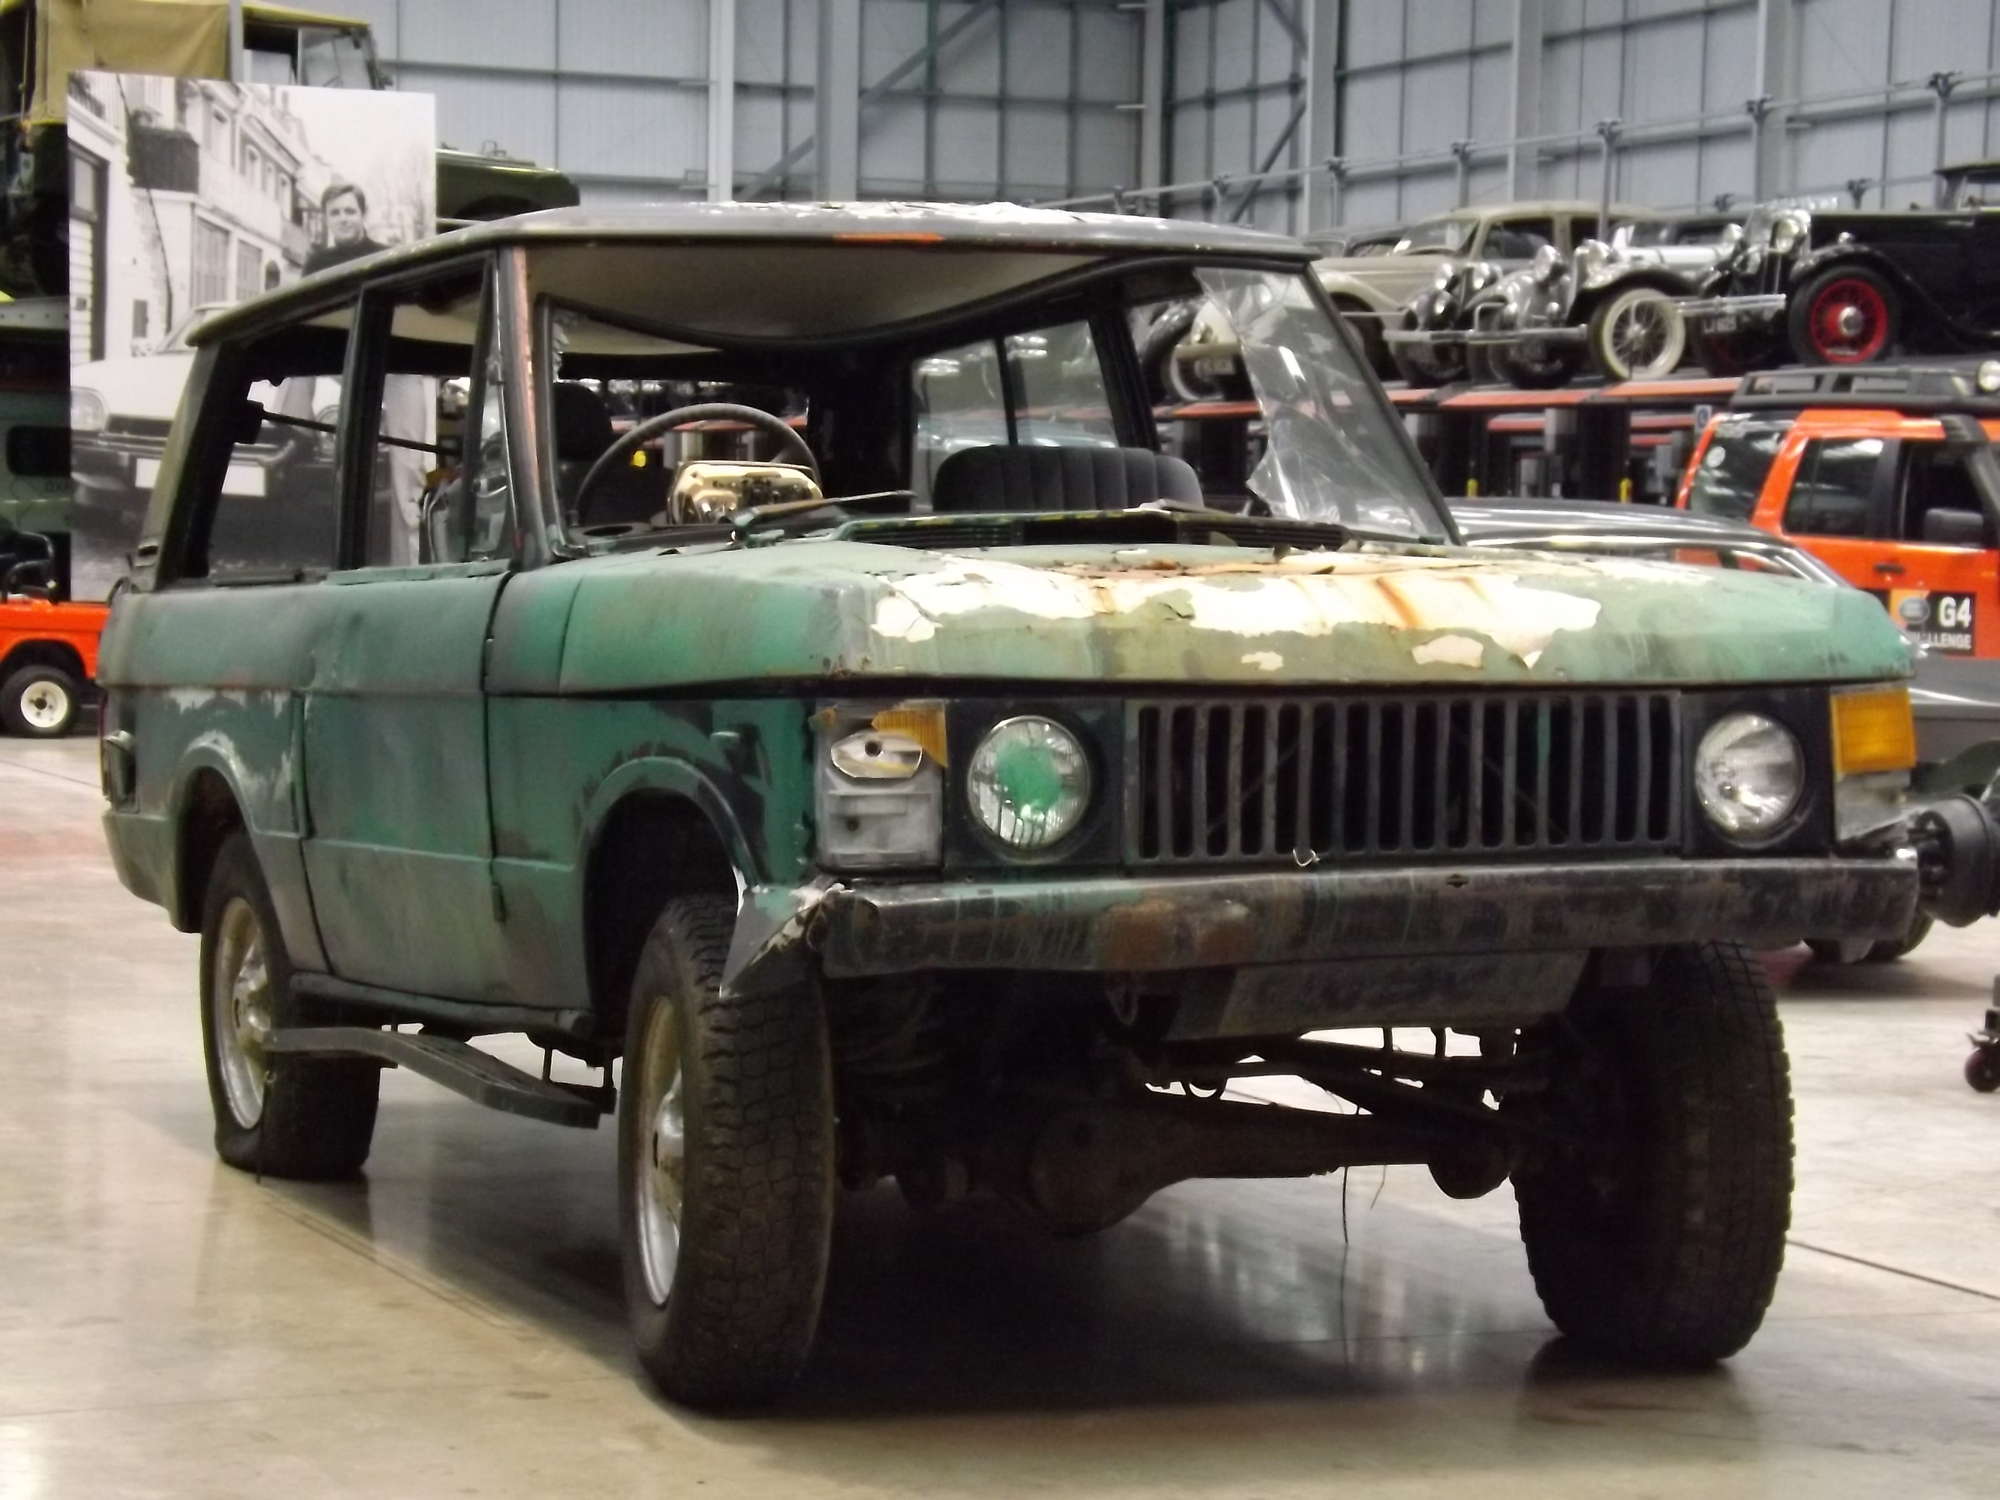 Get Up, Stand Up and restore Bob Marley's old Range Rover